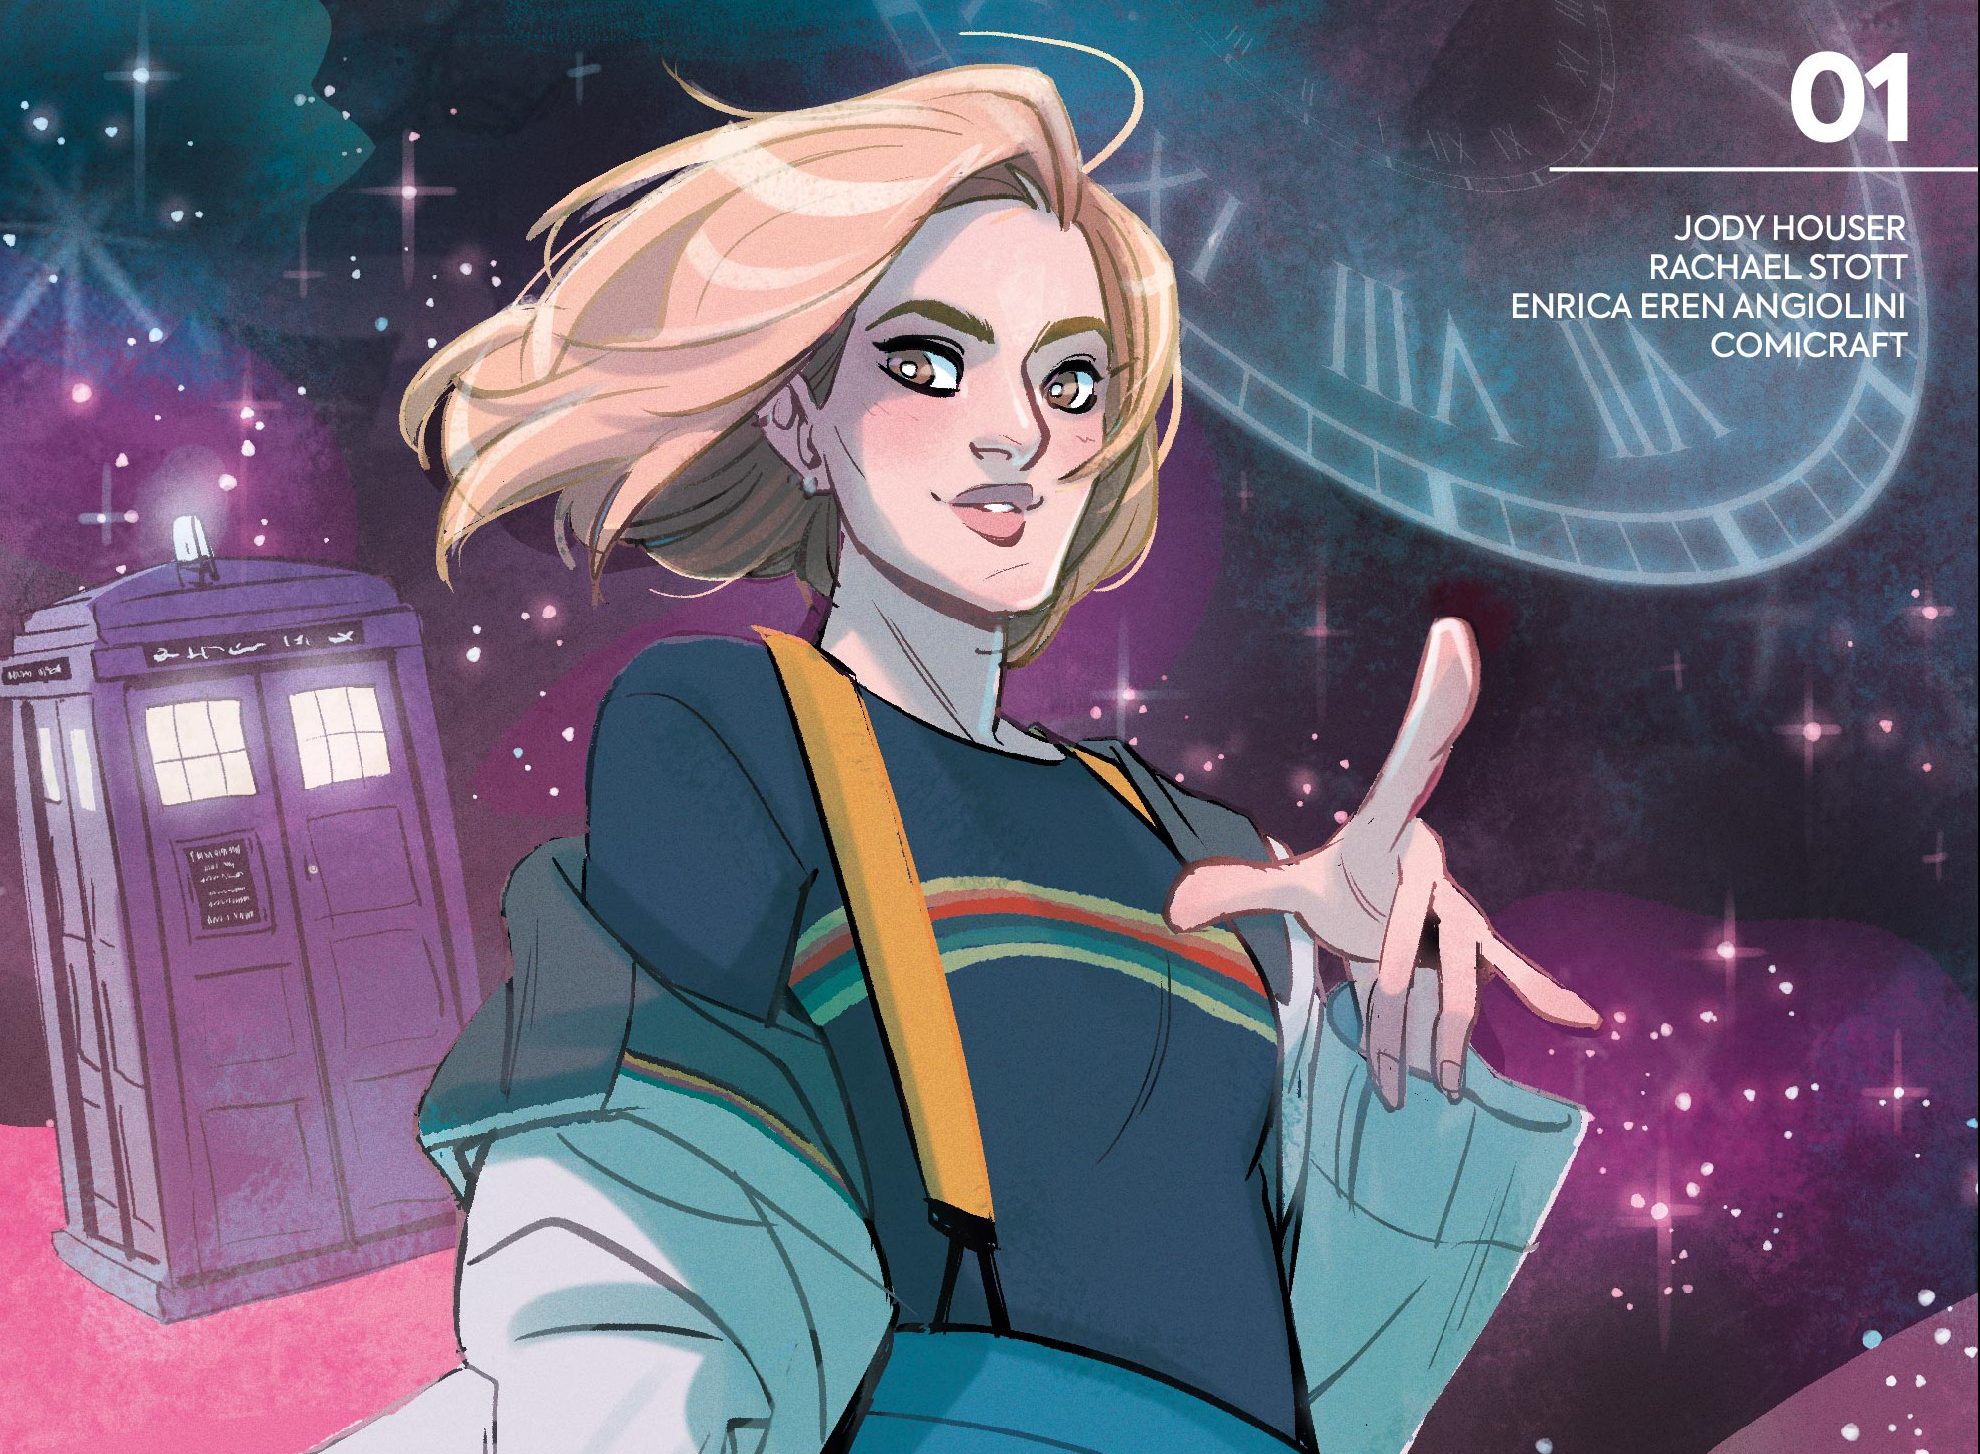 Doctor Who: The Thirteenth Doctor #1 Review